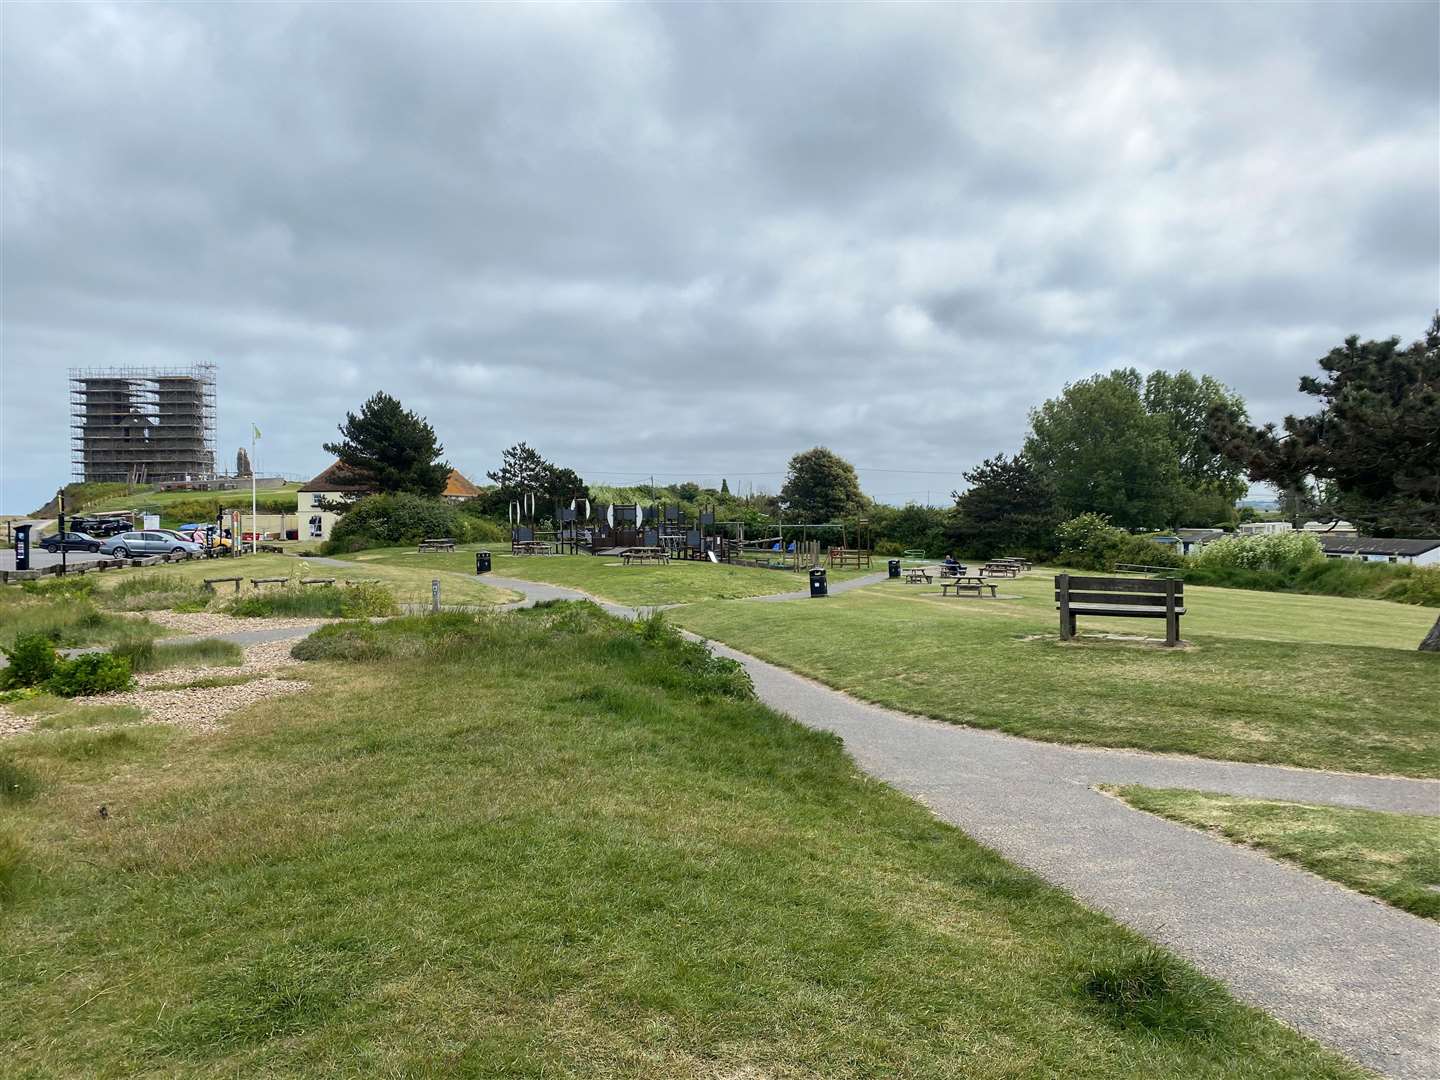 Reculver Country Park picnic and play area